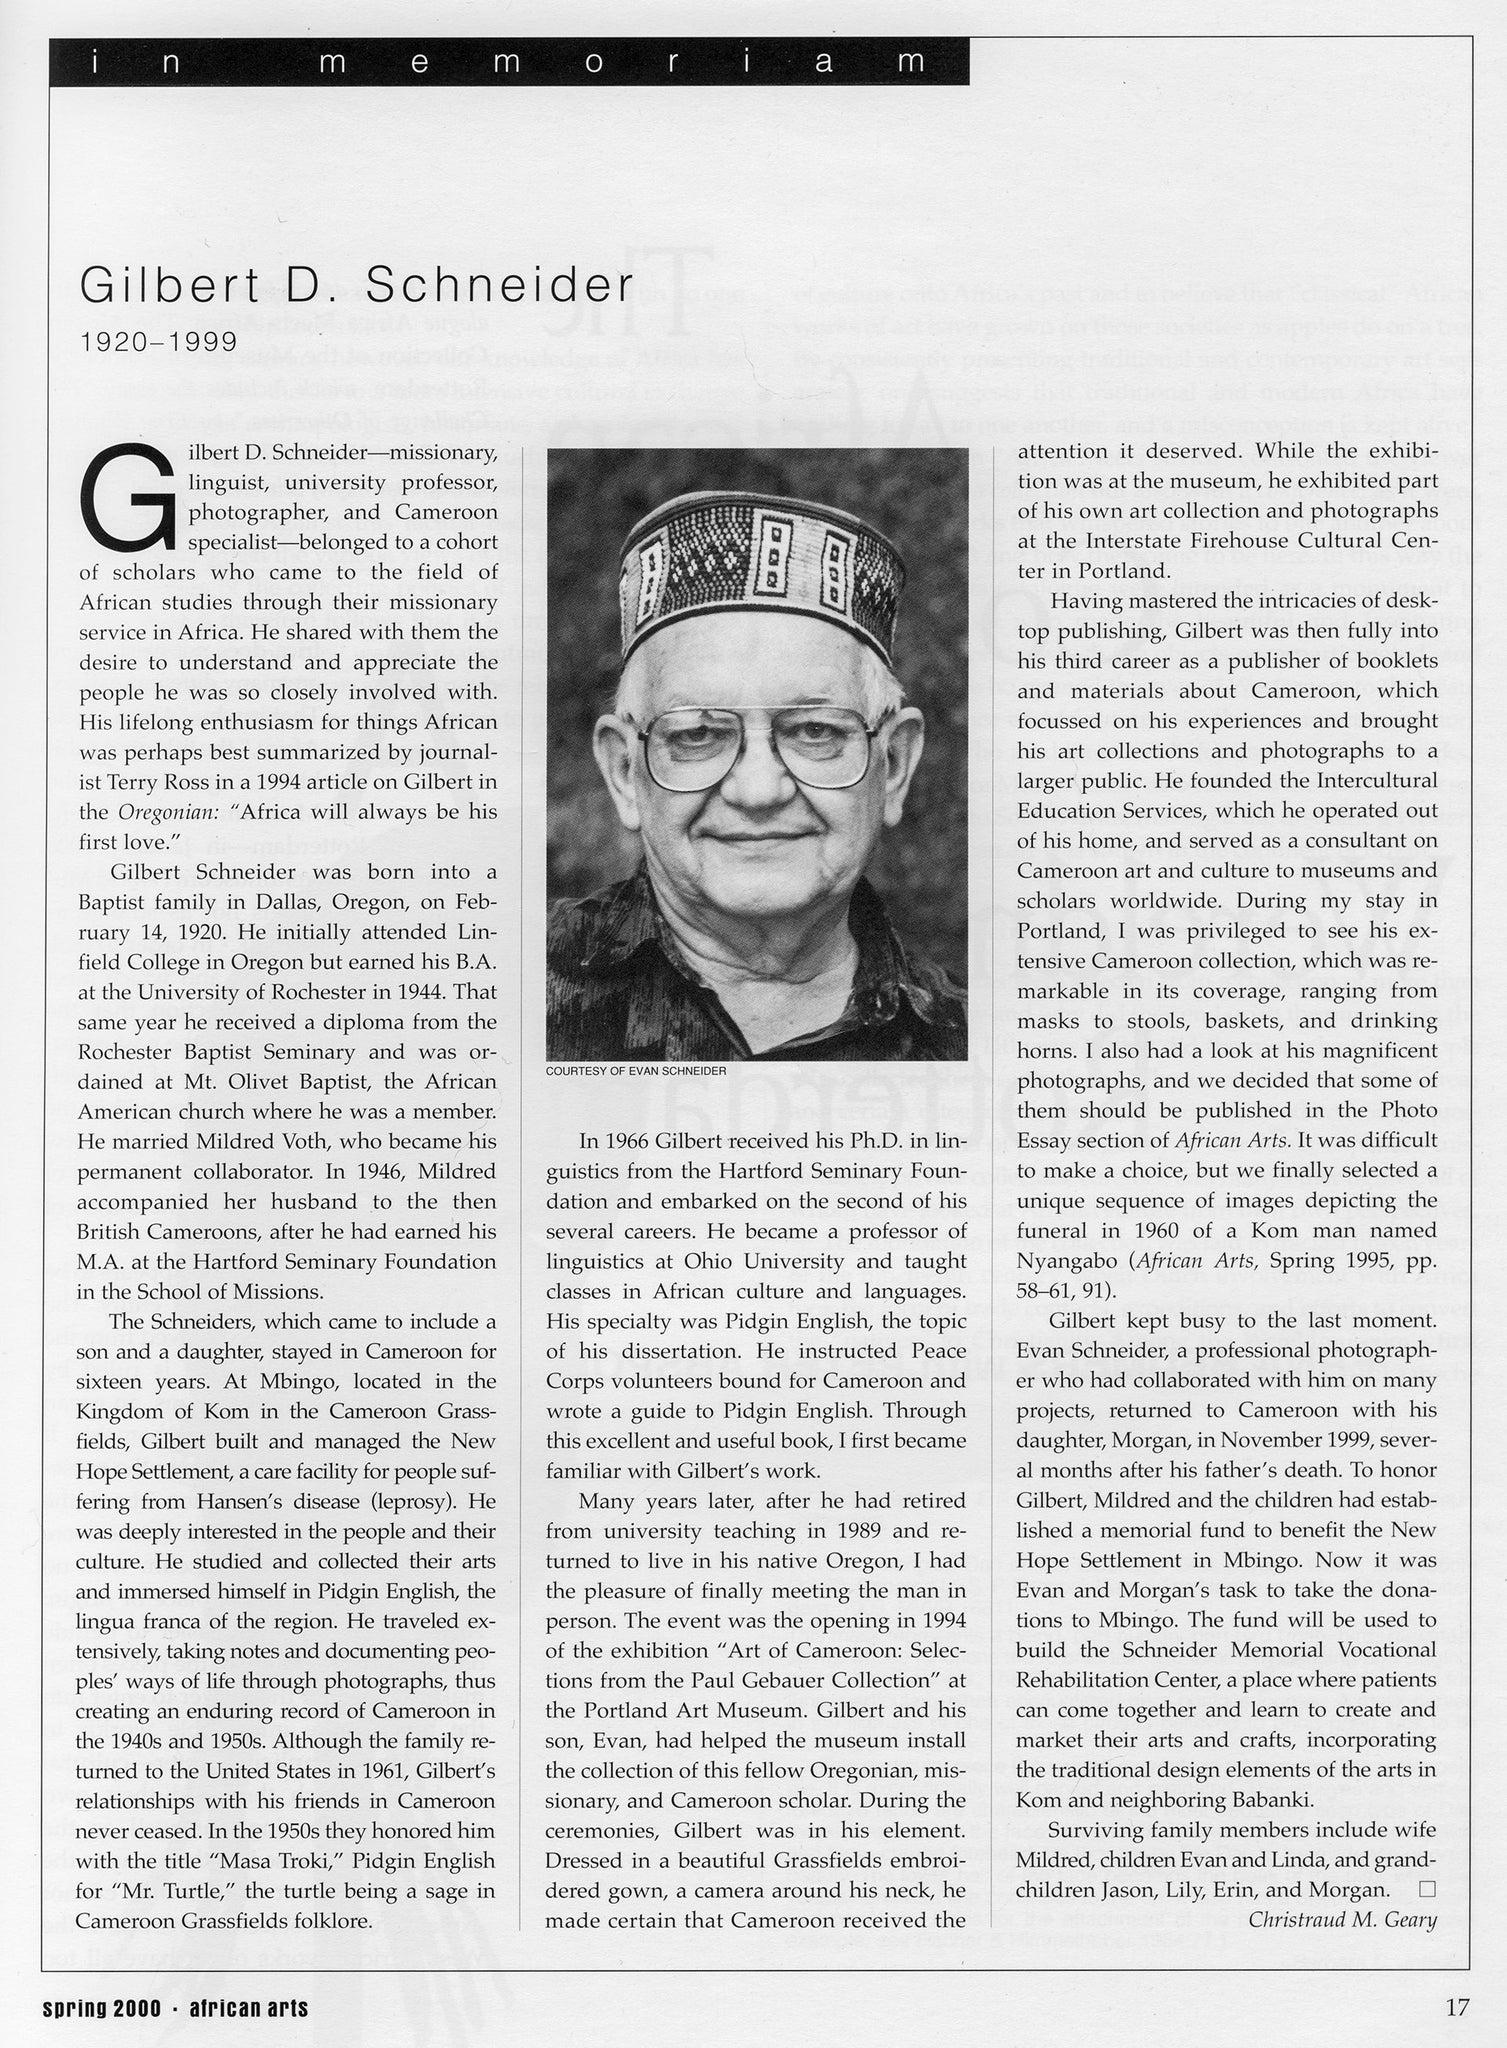 Gilbert D. Schneider Obituary written by Christraud M. Geary. Permission for use received from MIT